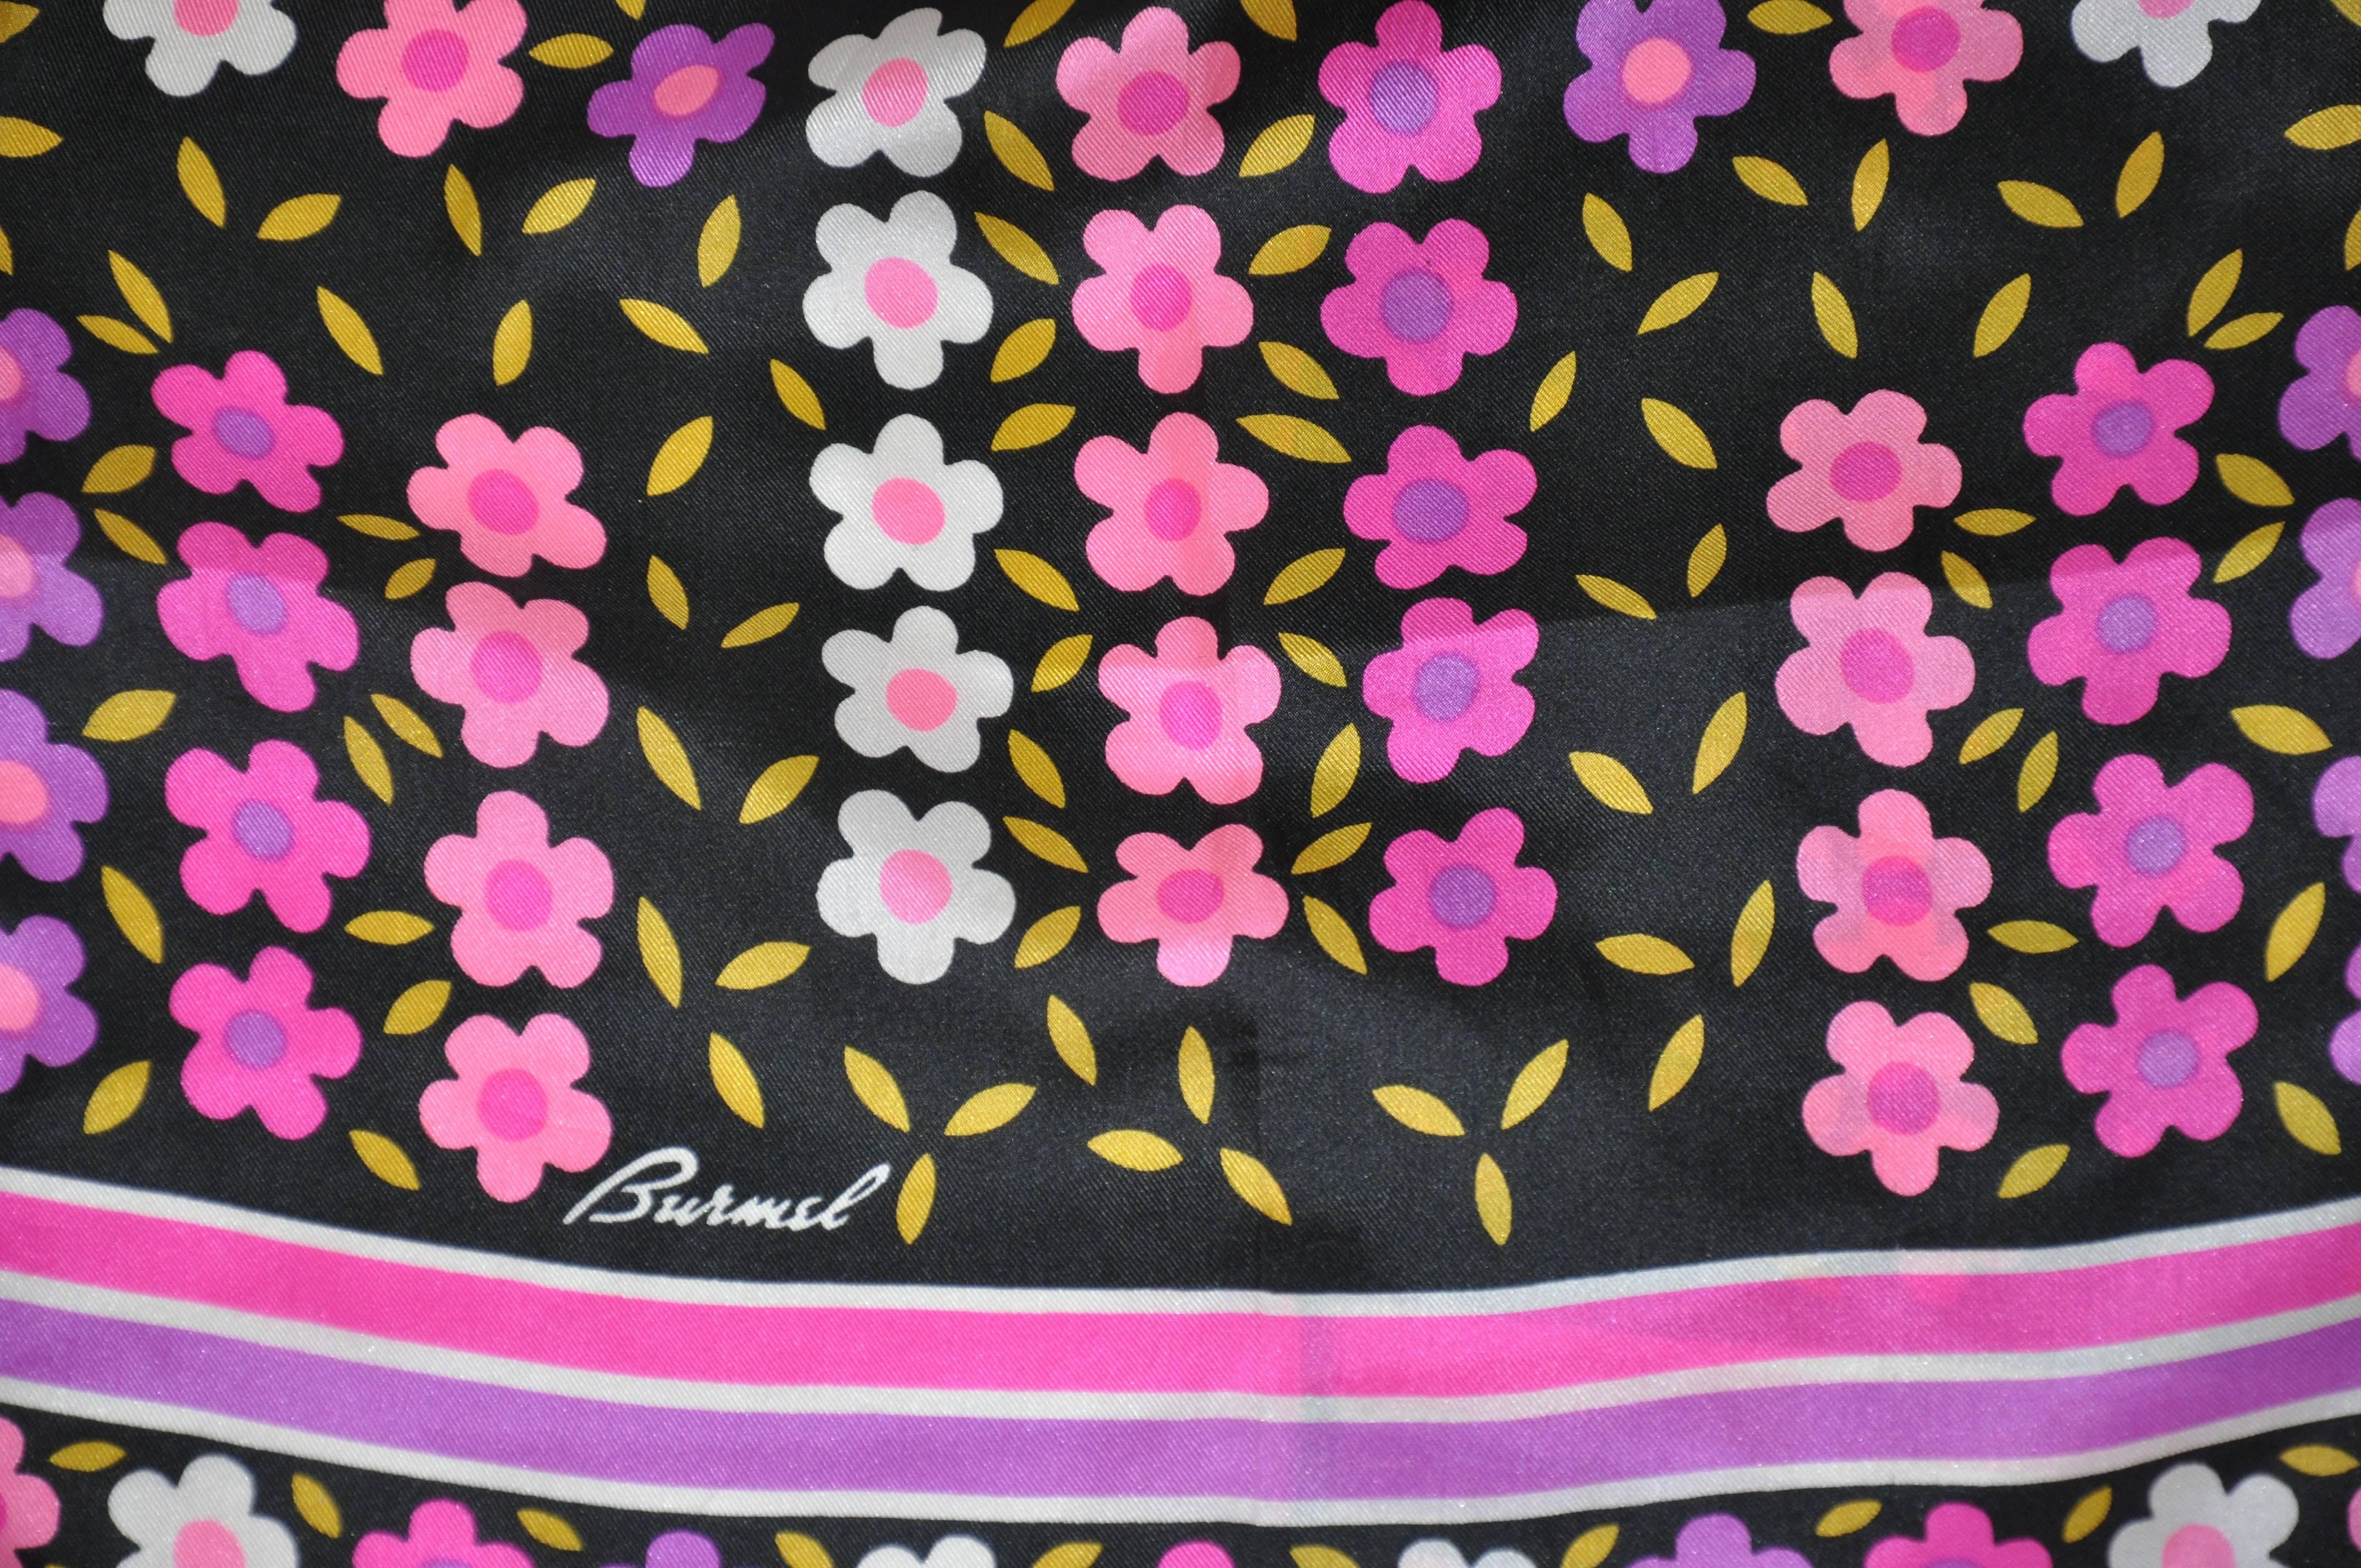 Burmel wonderful blend of violet, pinks and fuchsia multi-color floral accented with fuchsia borders silk scarf measures 13" x 46" and finished with hand-rolled edges. Made in Italy.